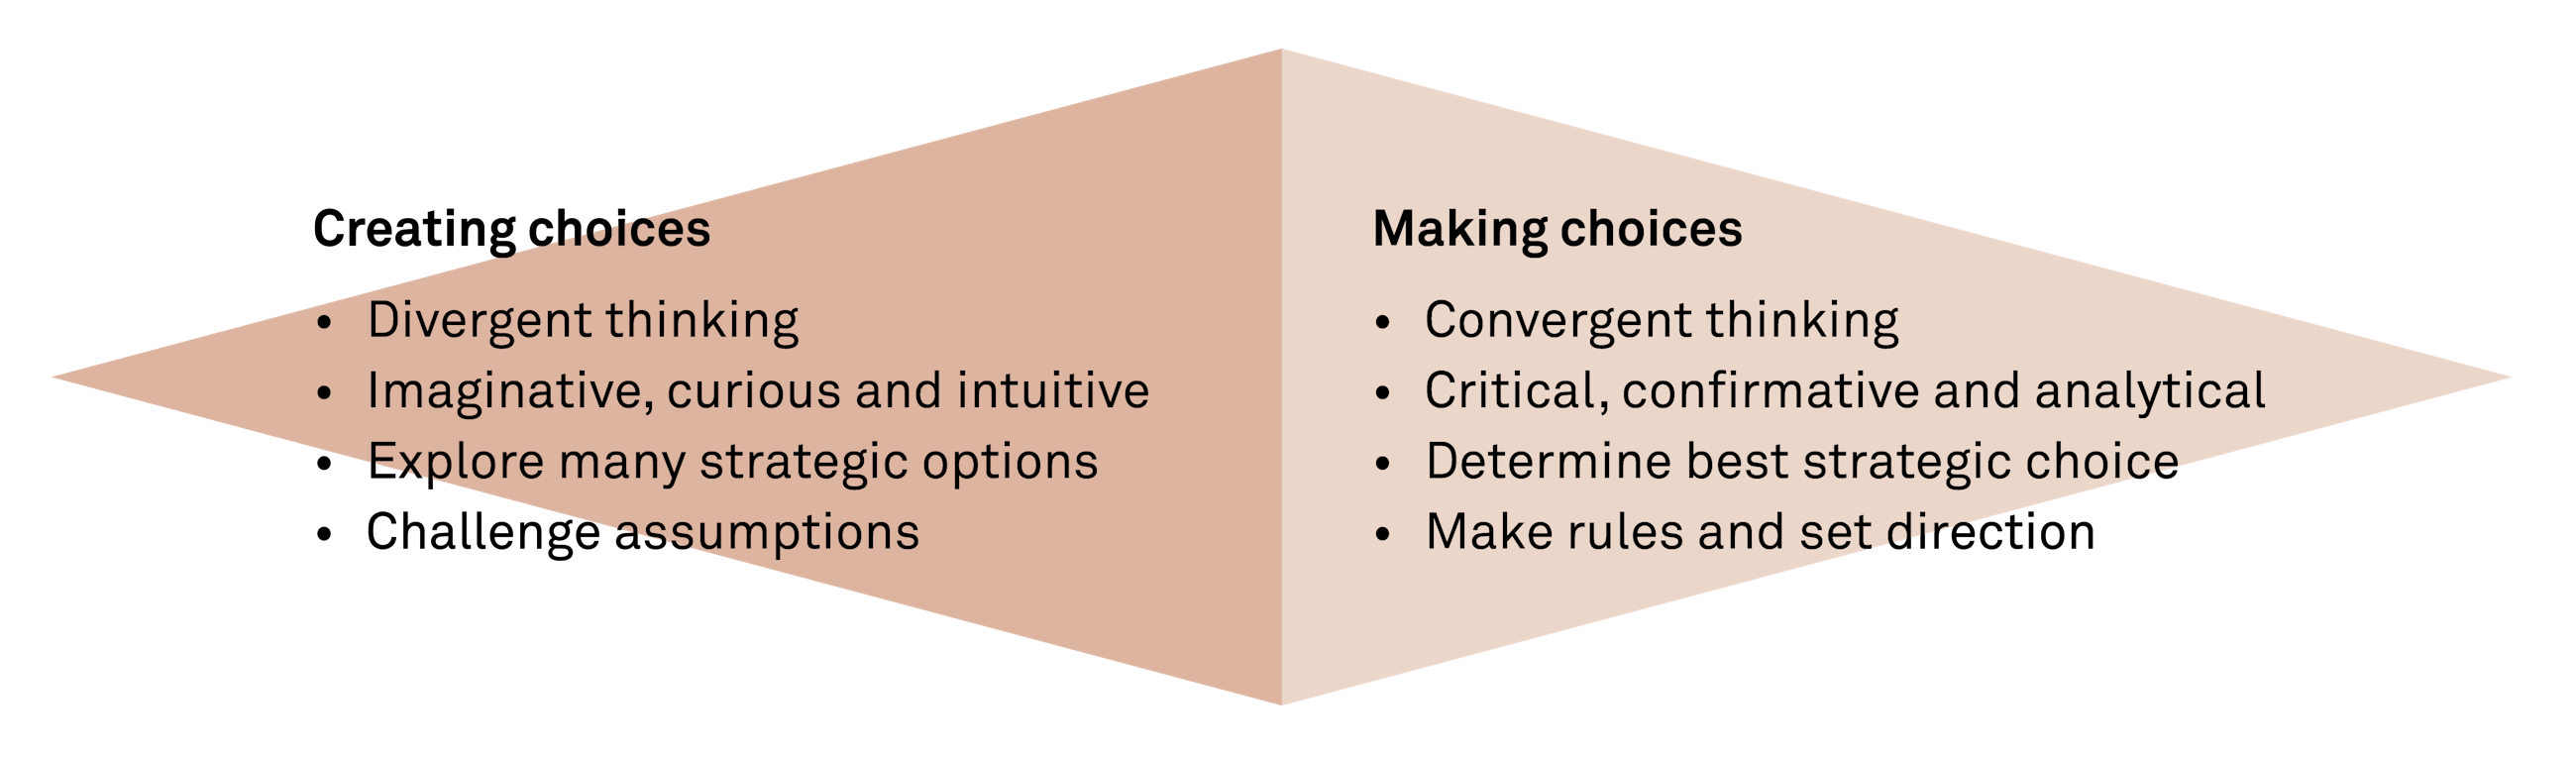 Making real strategic choices fig02